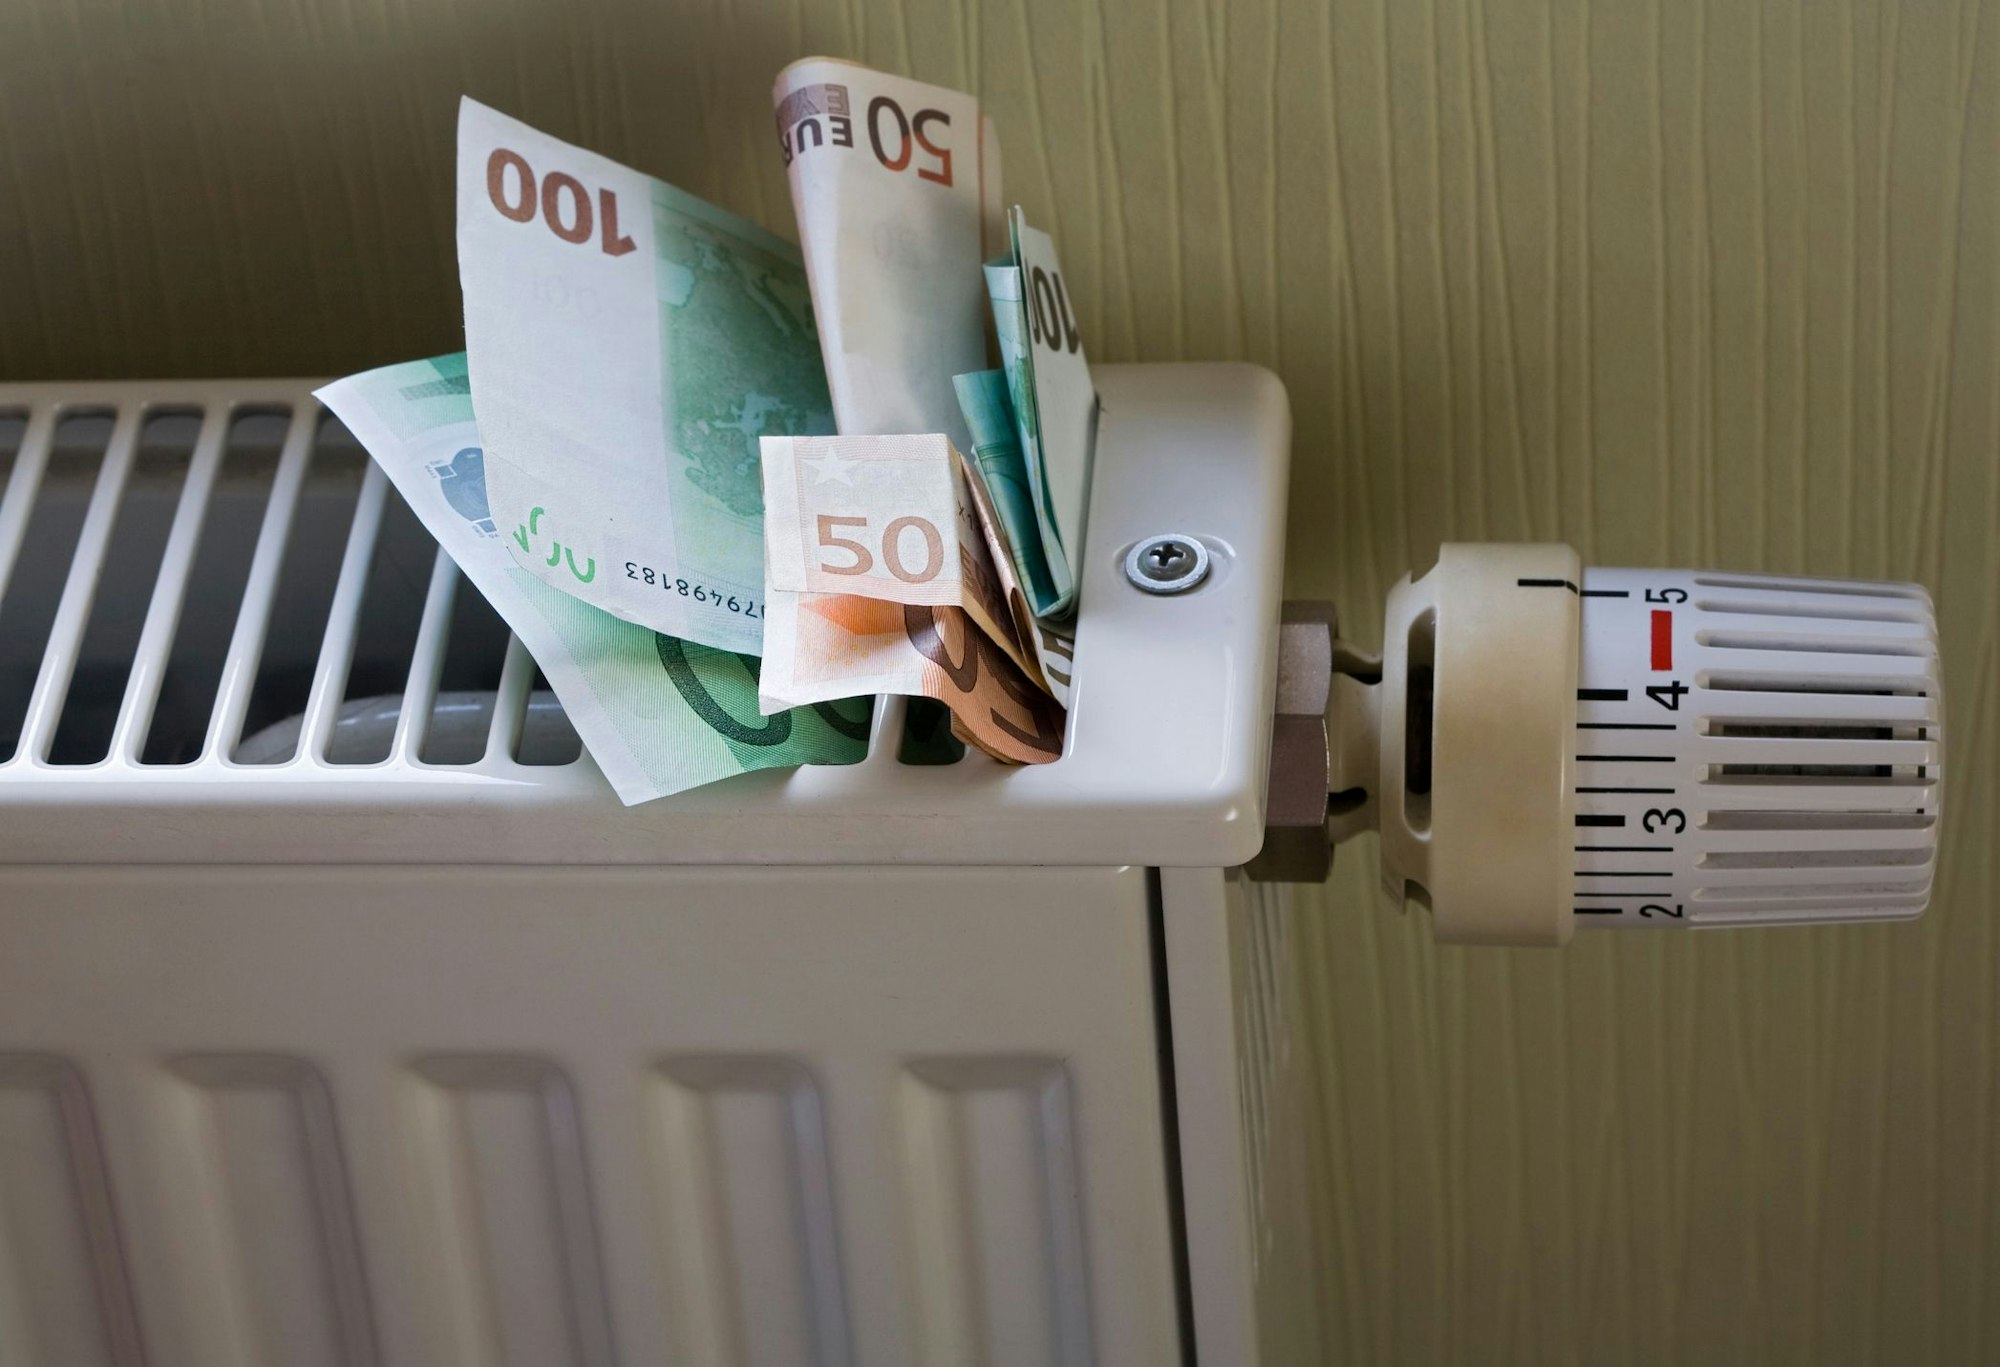 Euro banknotes stuck in a radiator